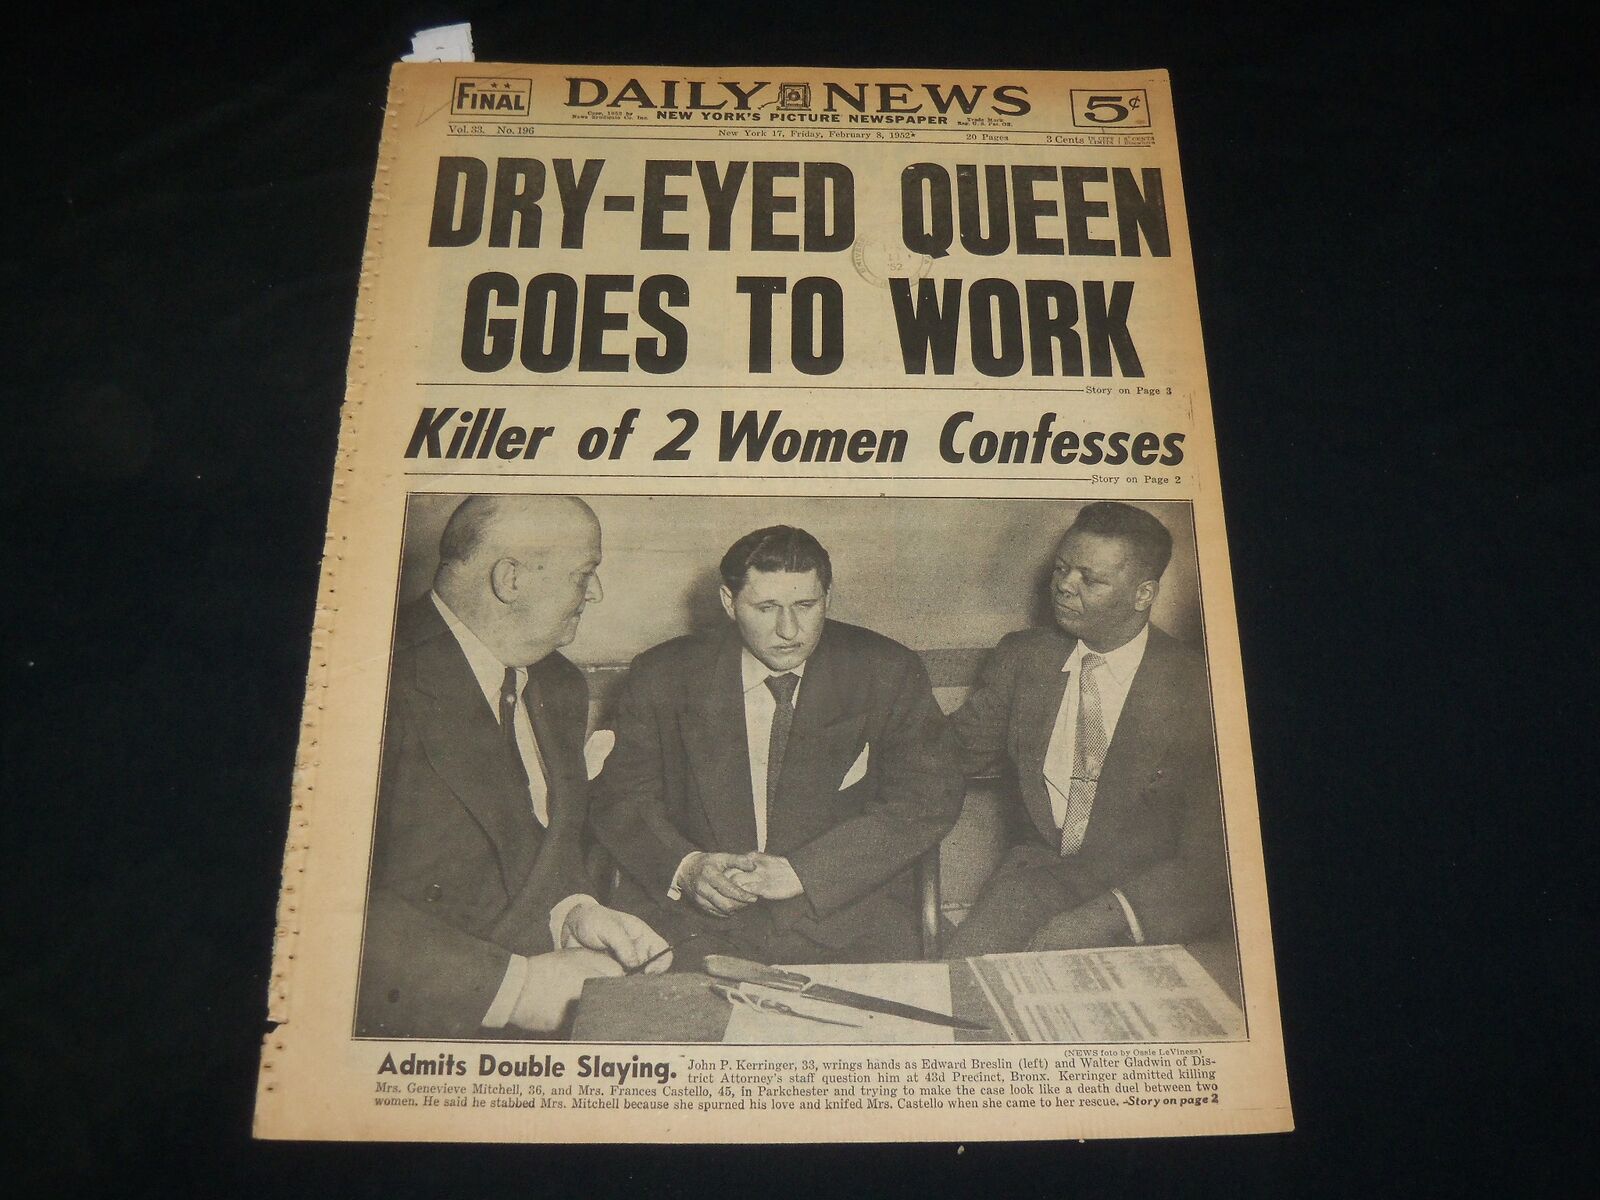 1952 FEBRUARY 8 NEW YORK DAILY NEWS - DRY-EYED QUEEN GOES TO WORK - NP 5403